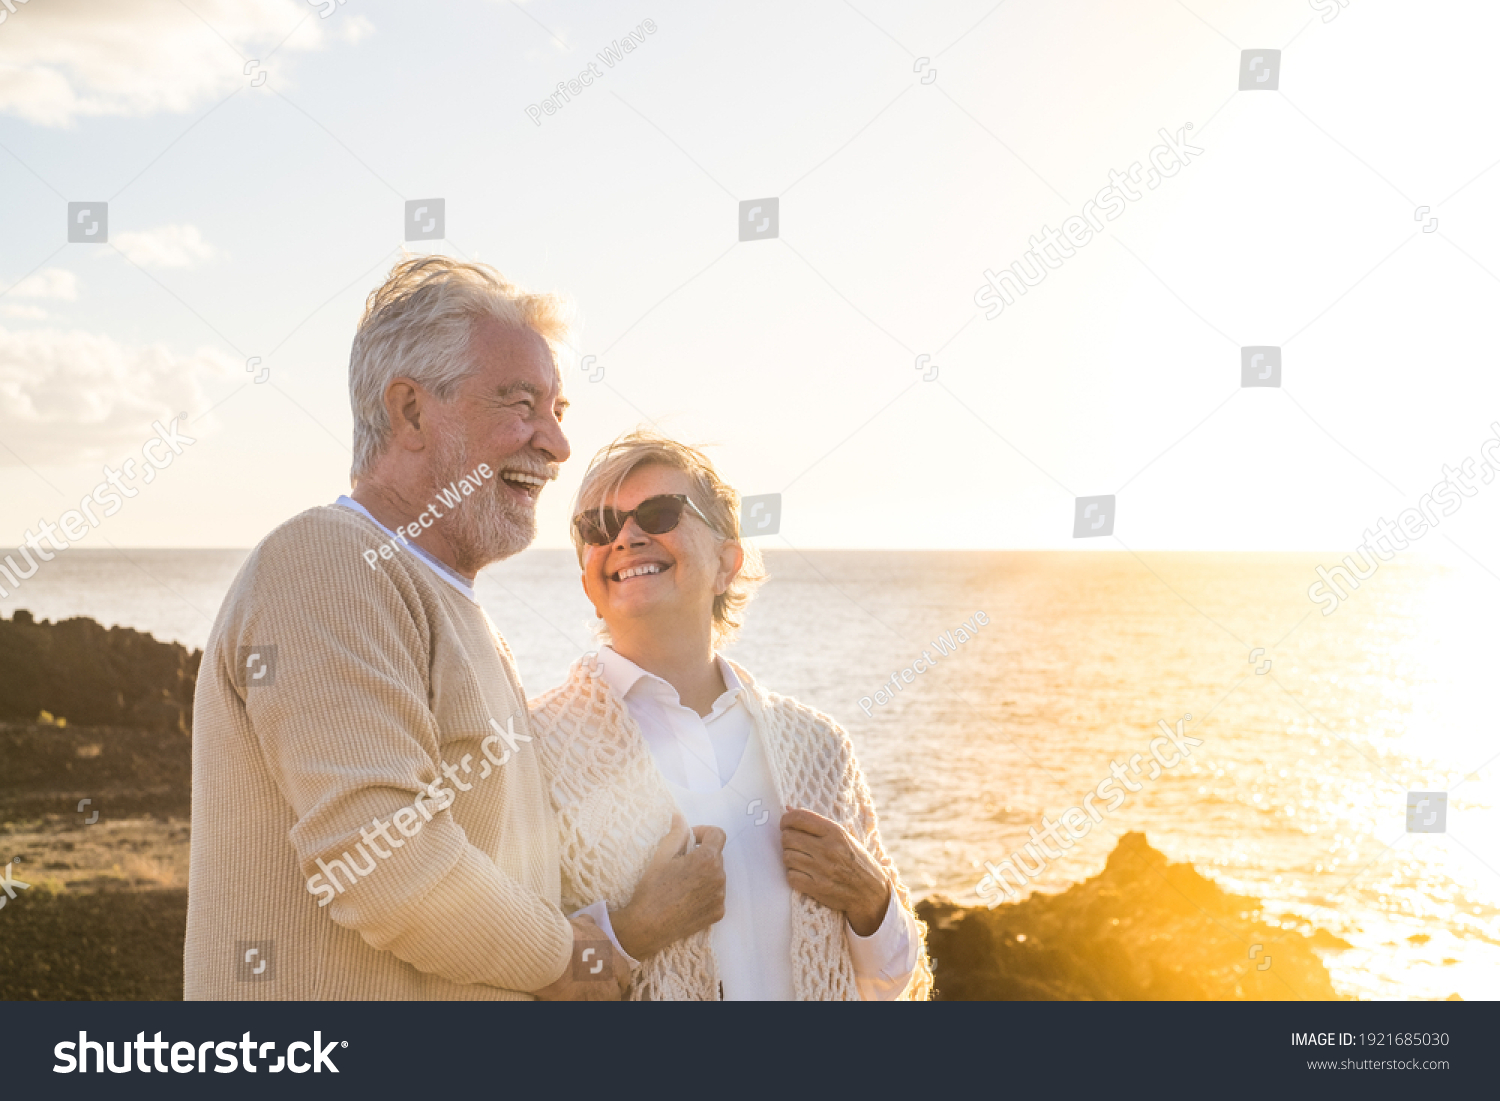 close up and portrait of two happy and active seniors or pensioners having fun and enjoying looking at the sunset smiling with the sea - old people outdoors enjoying vacations together #1921685030